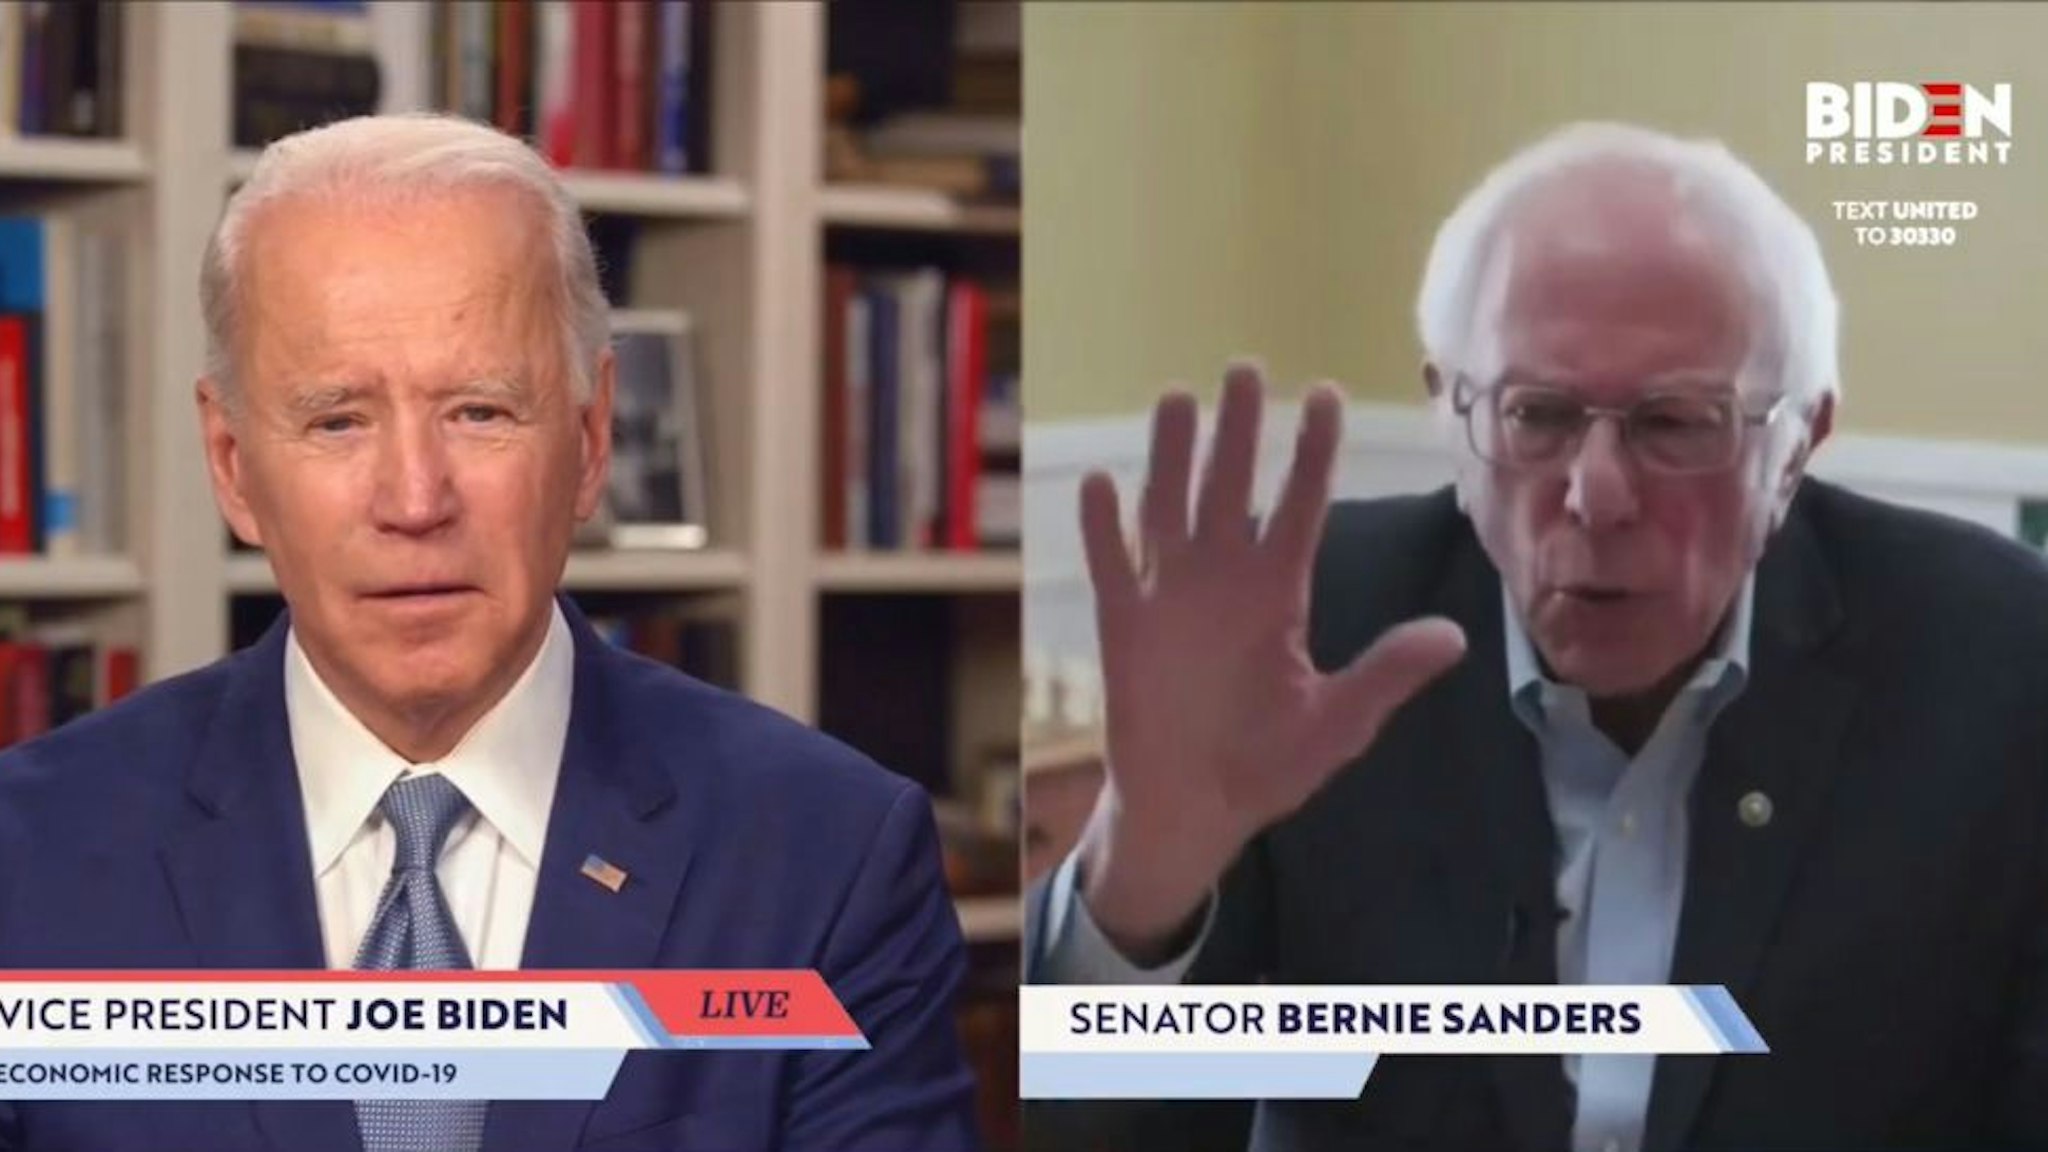 UNKNOWN LOCATION - APRIL 13: In this screengrab taken from JoeBiden.com campaign website, U.S. Sen. Bernie Sanders (I-VT) endorses Democratic presidential candidate former Vice President Joe Biden during a live streaming broadcast on April 13, 2020. Sanders said, “Today, I am asking all Americans—I’m asking every Democrat, I’m asking every Independent, I’m asking a lot of Republicans—to come together in this campaign to support your candidacy.” (Photo by JoeBiden.com via Getty Images)